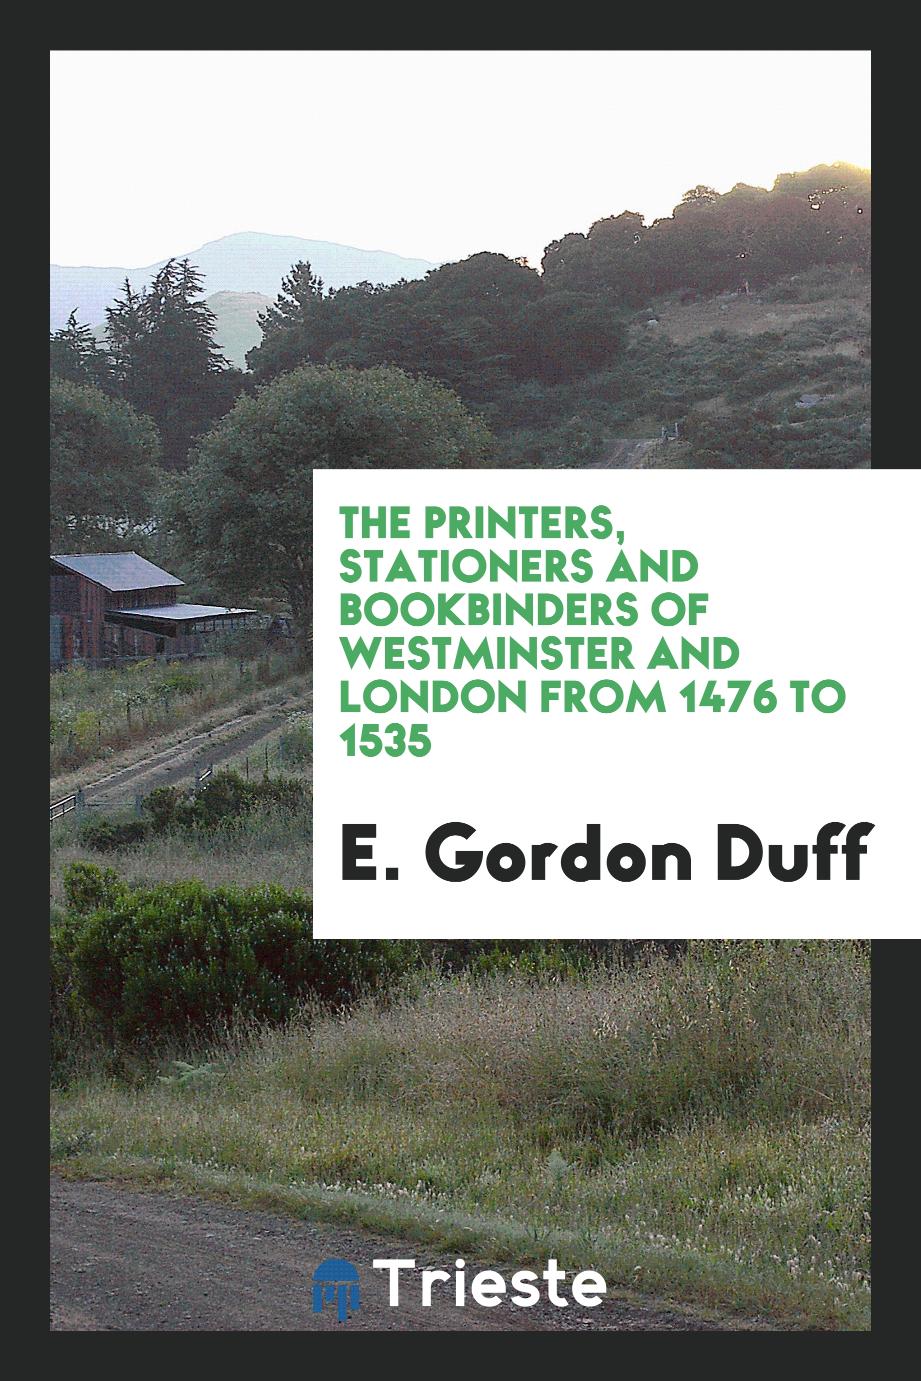 The printers, stationers and bookbinders of Westminster and London from 1476 to 1535